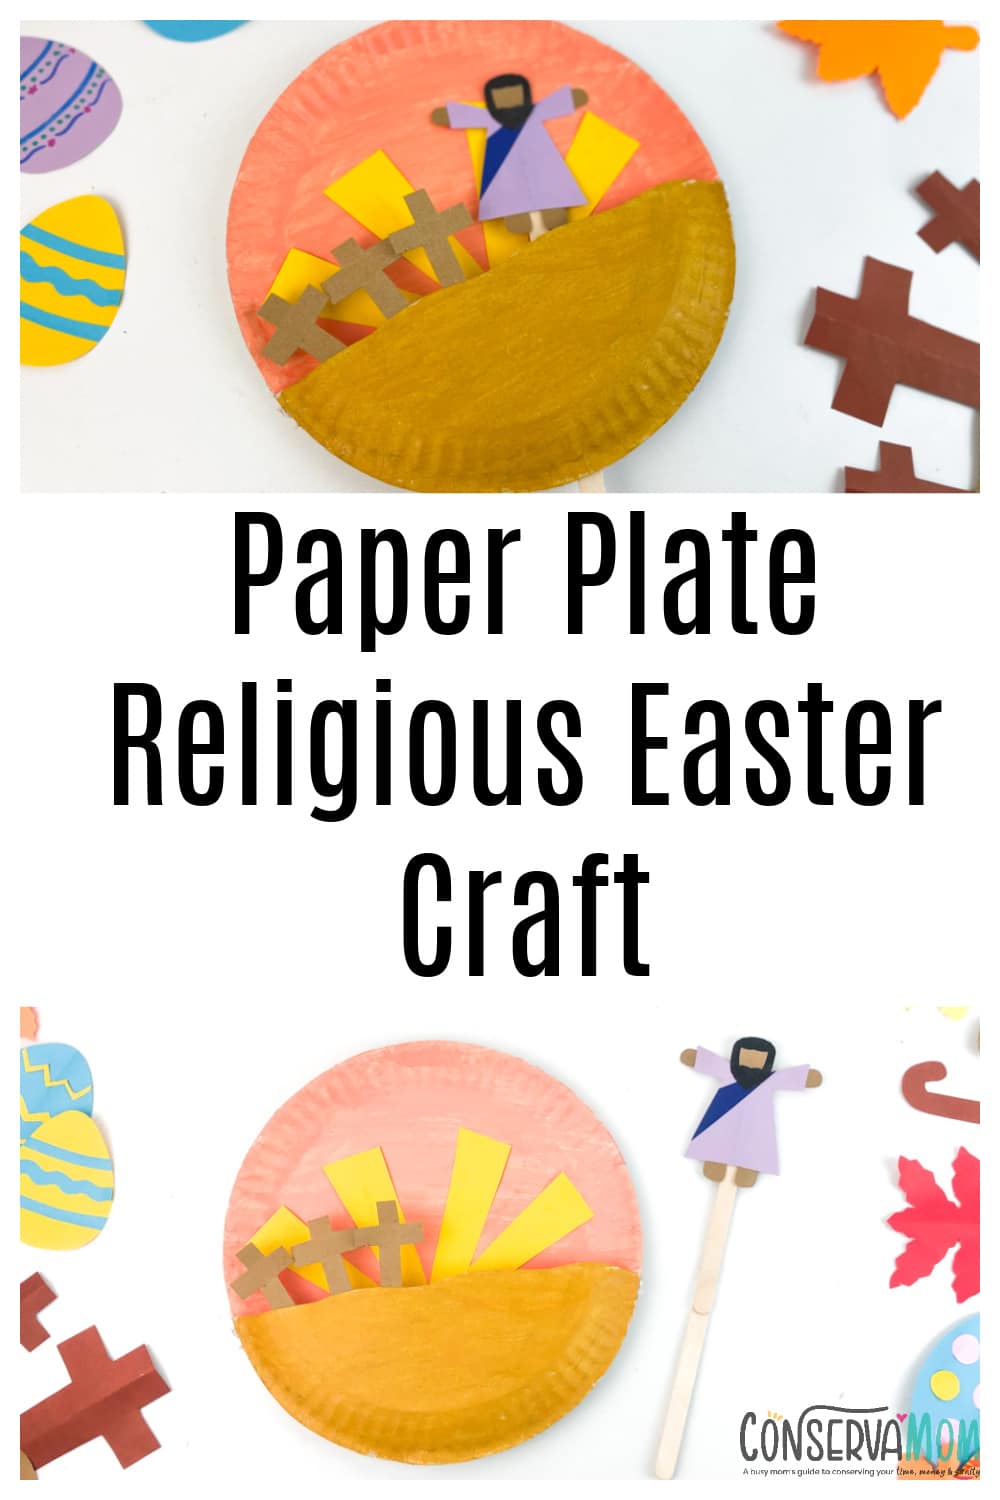 Paper Plate Religious Easter Craft